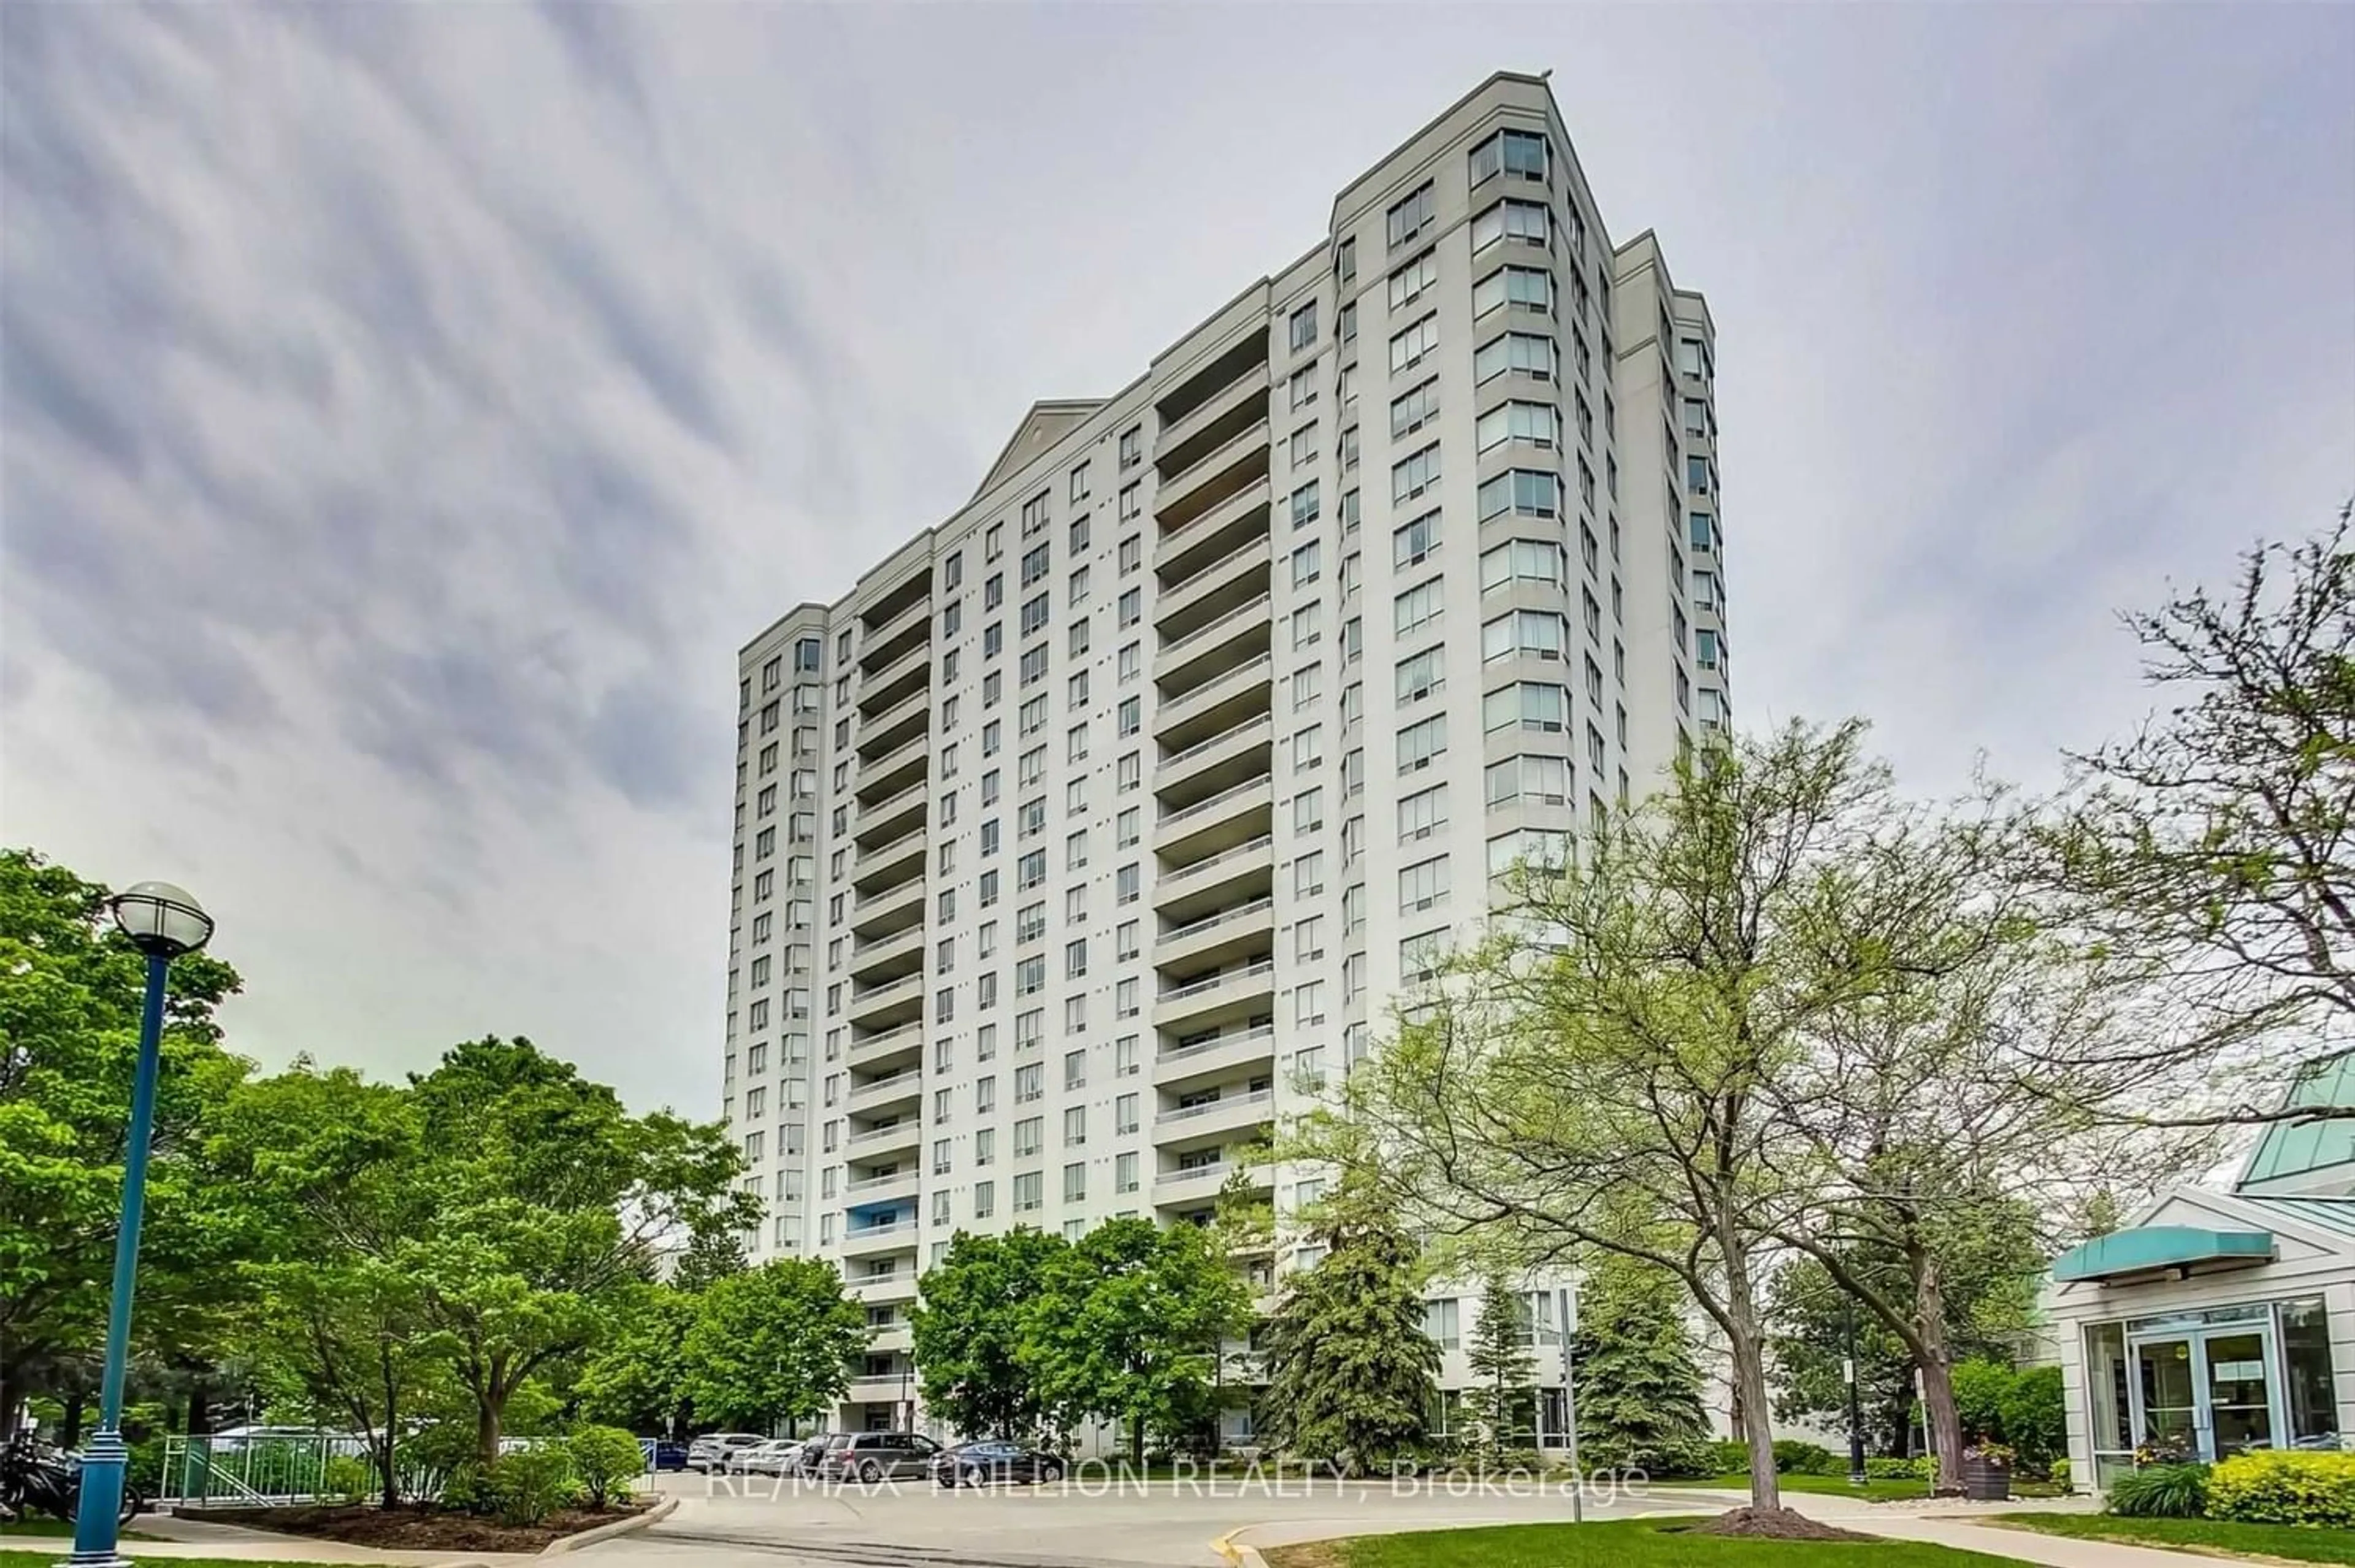 Storage room or clothes room or walk-in closet for 5001 Finch Ave #302, Toronto Ontario M1S 5J9